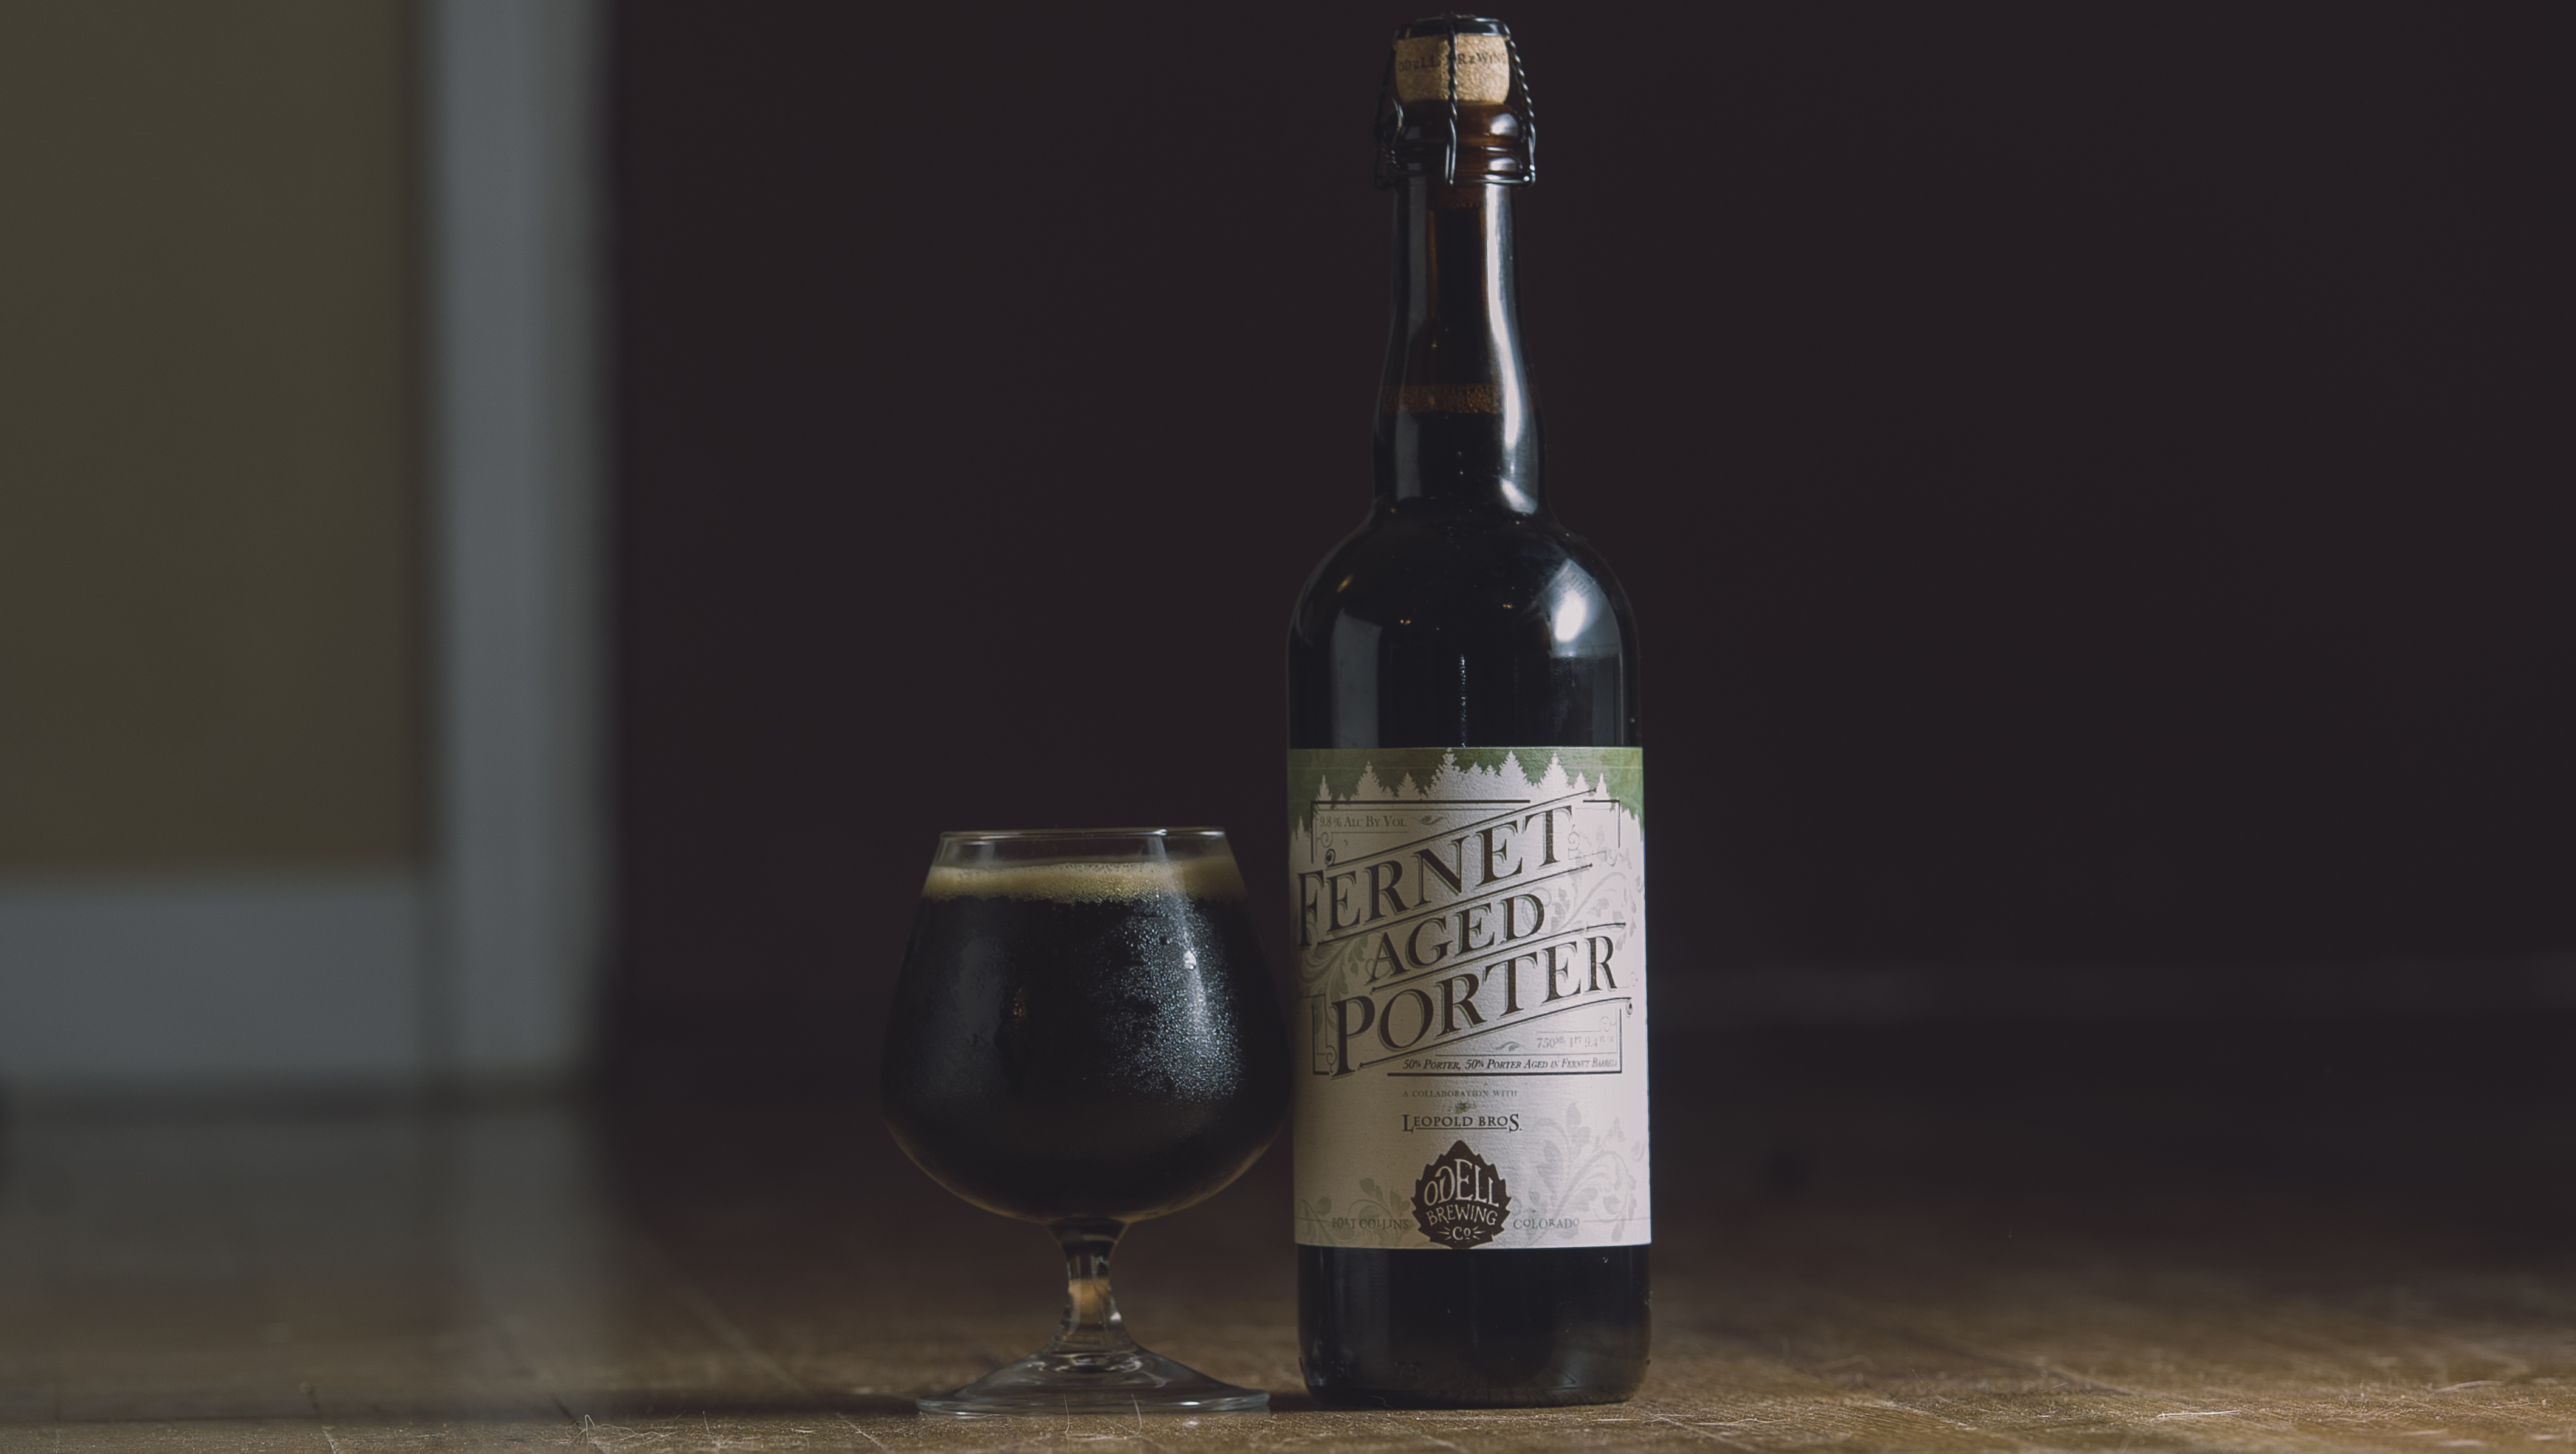 Getting a Woody | Odell’s Fernet Aged Porter